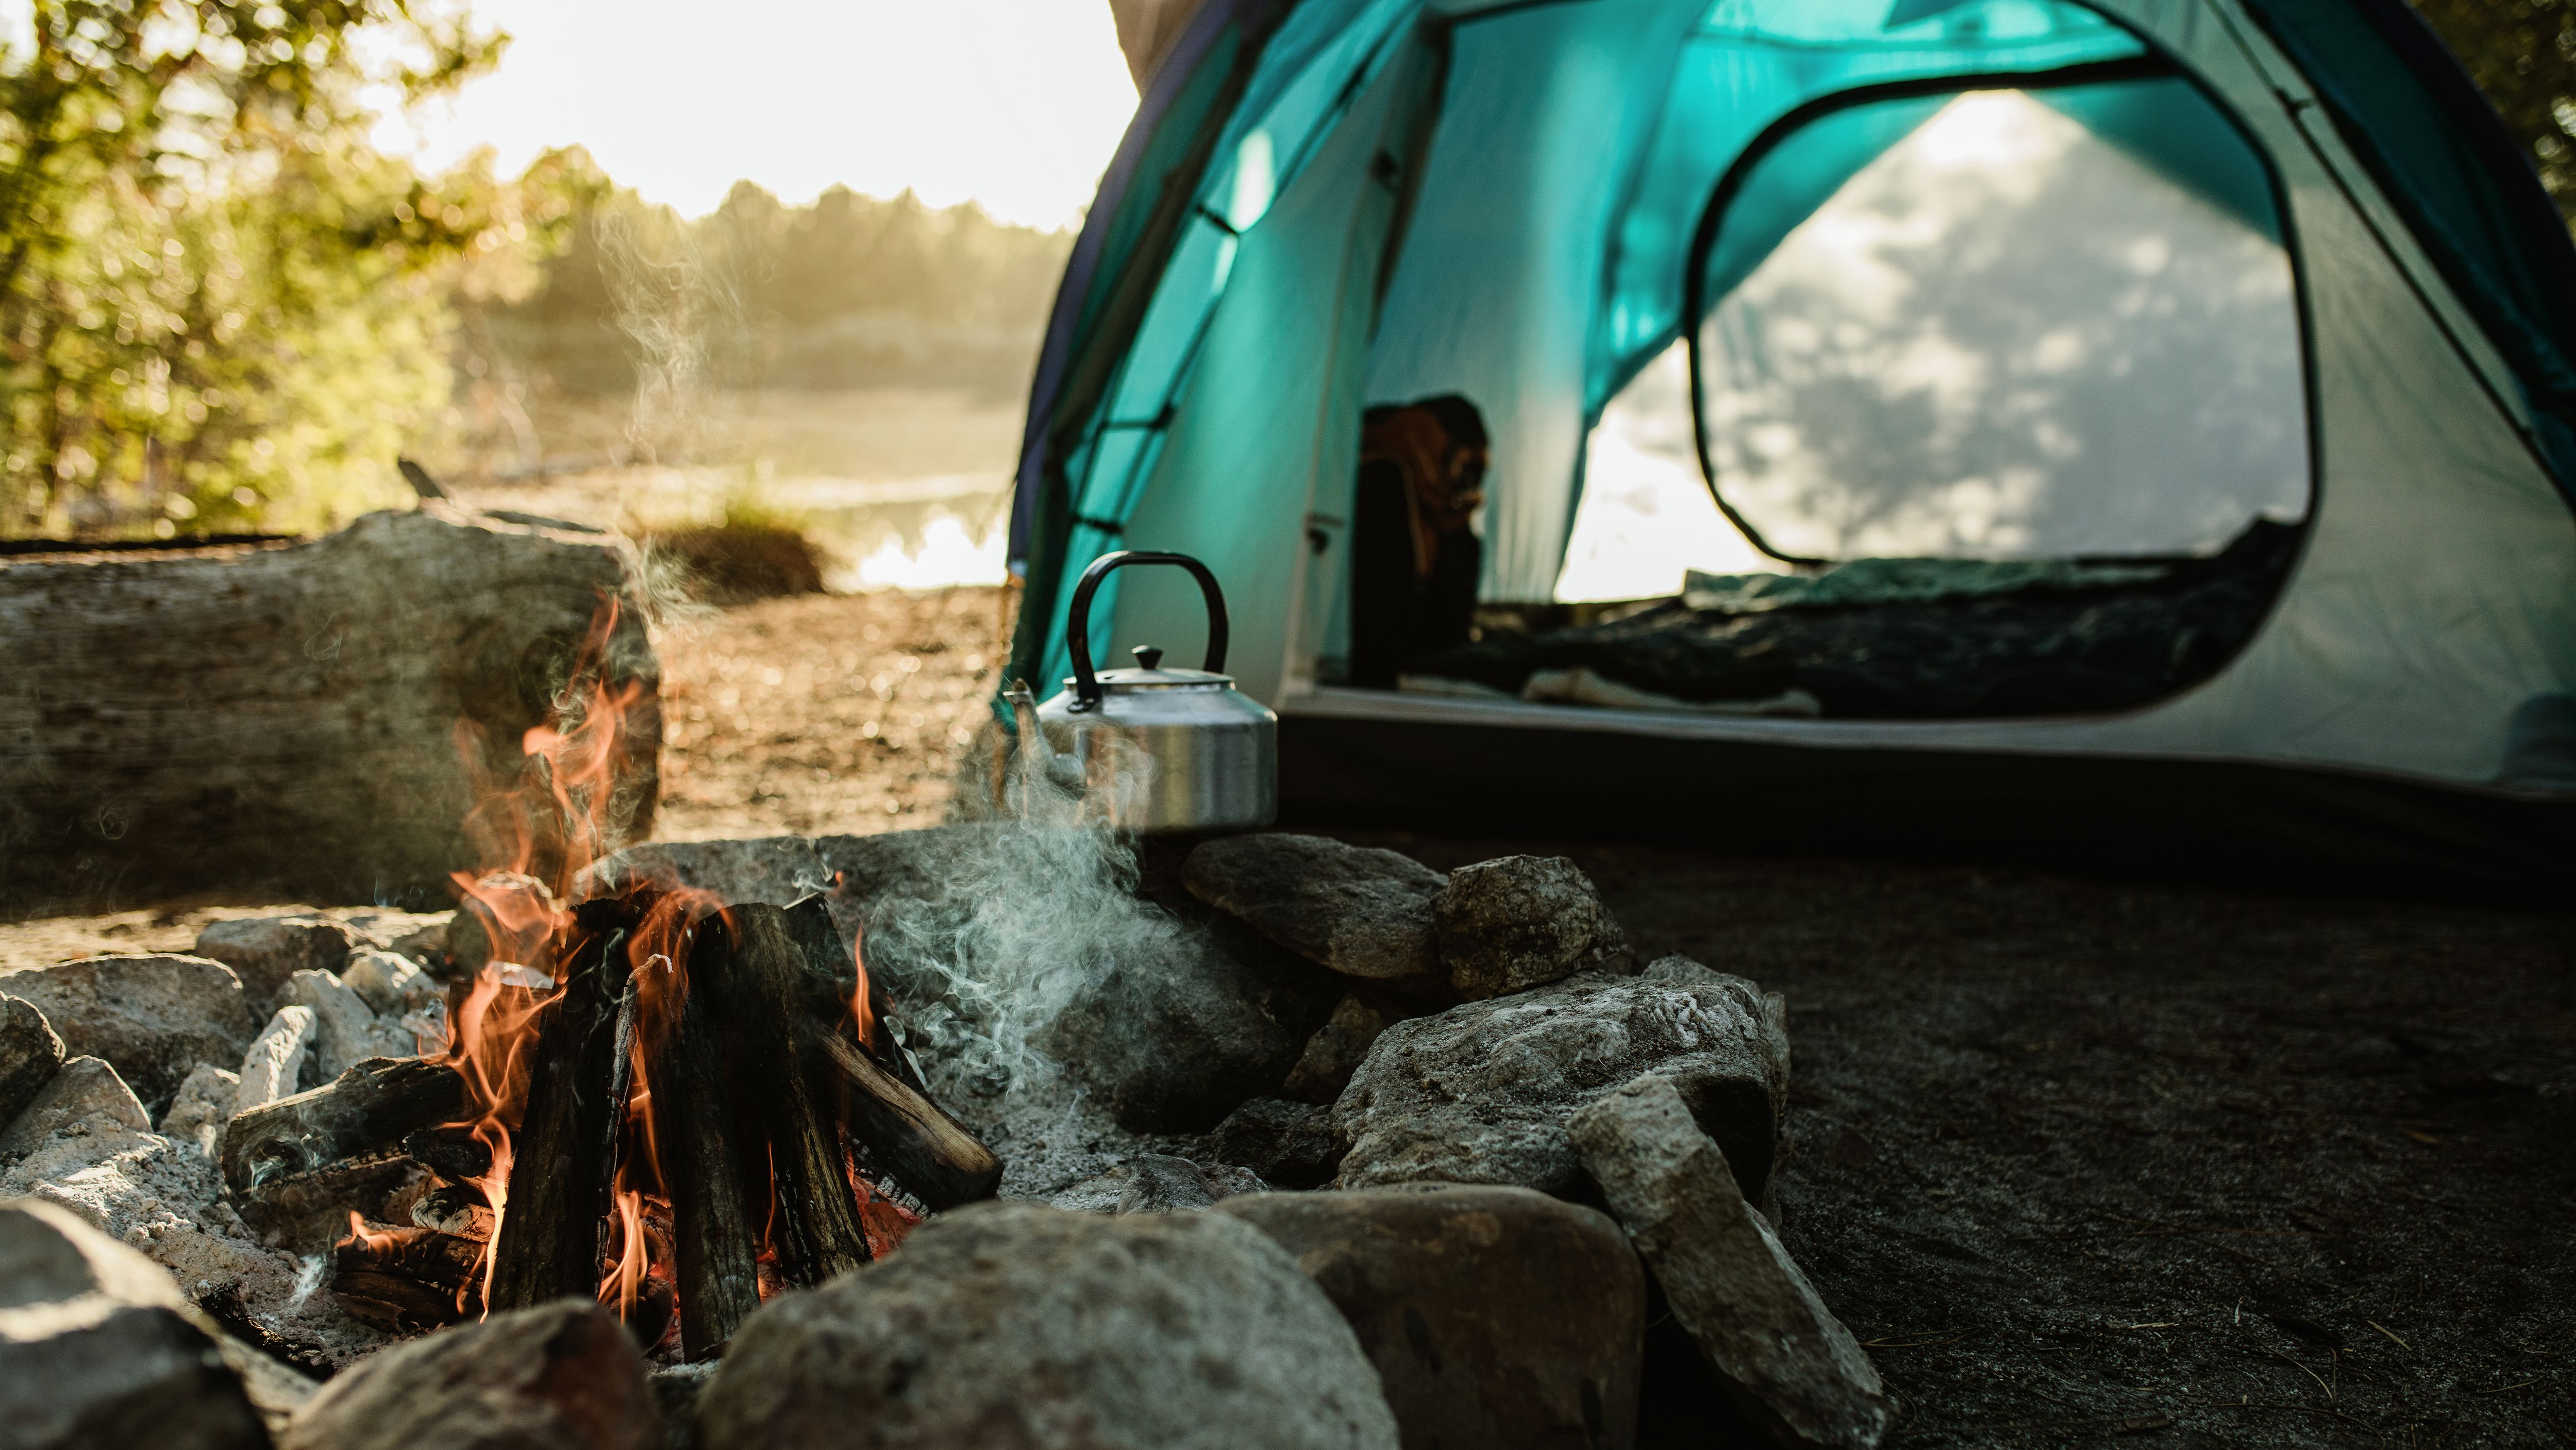 Transform Your Outdoor Experience With These Incredible Camping